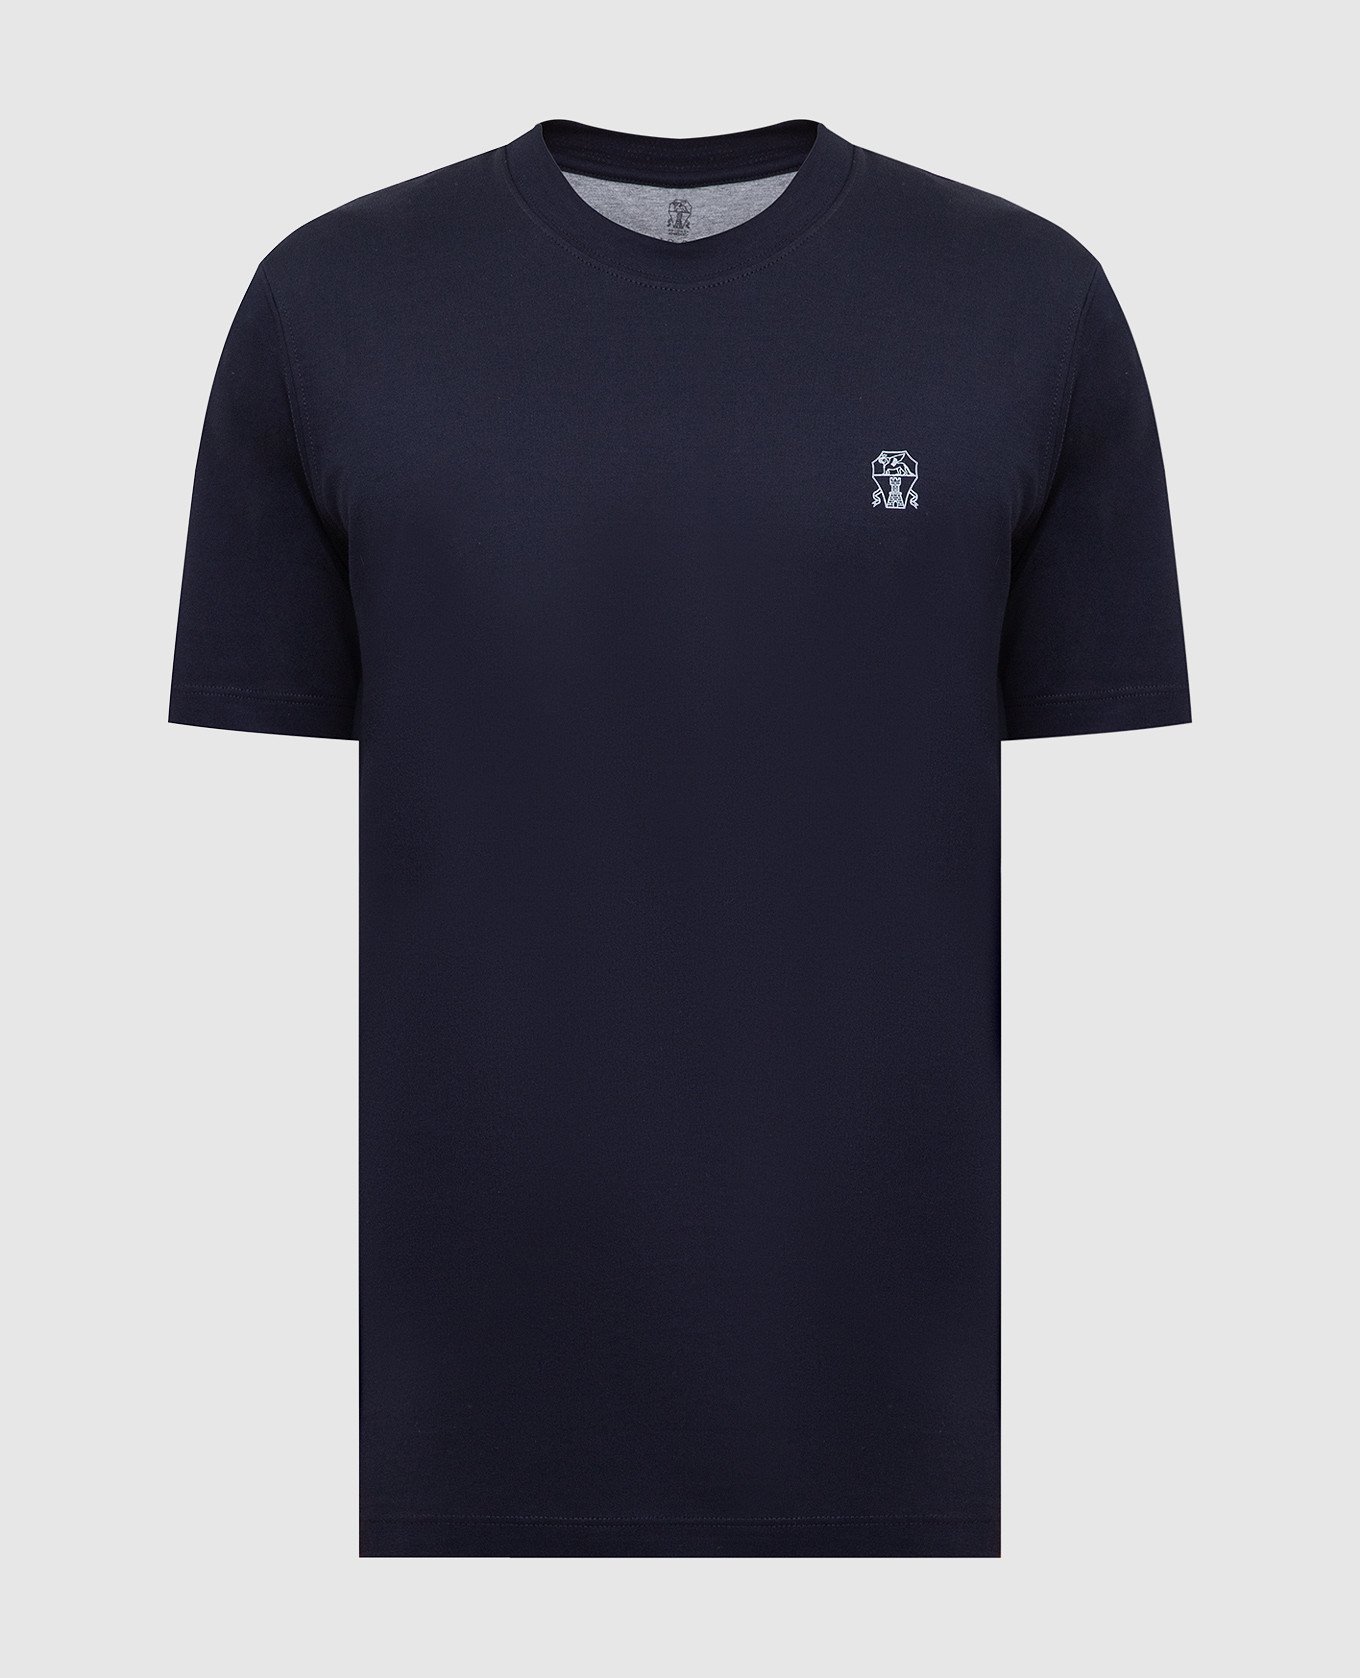 Navy T-shirt with logo